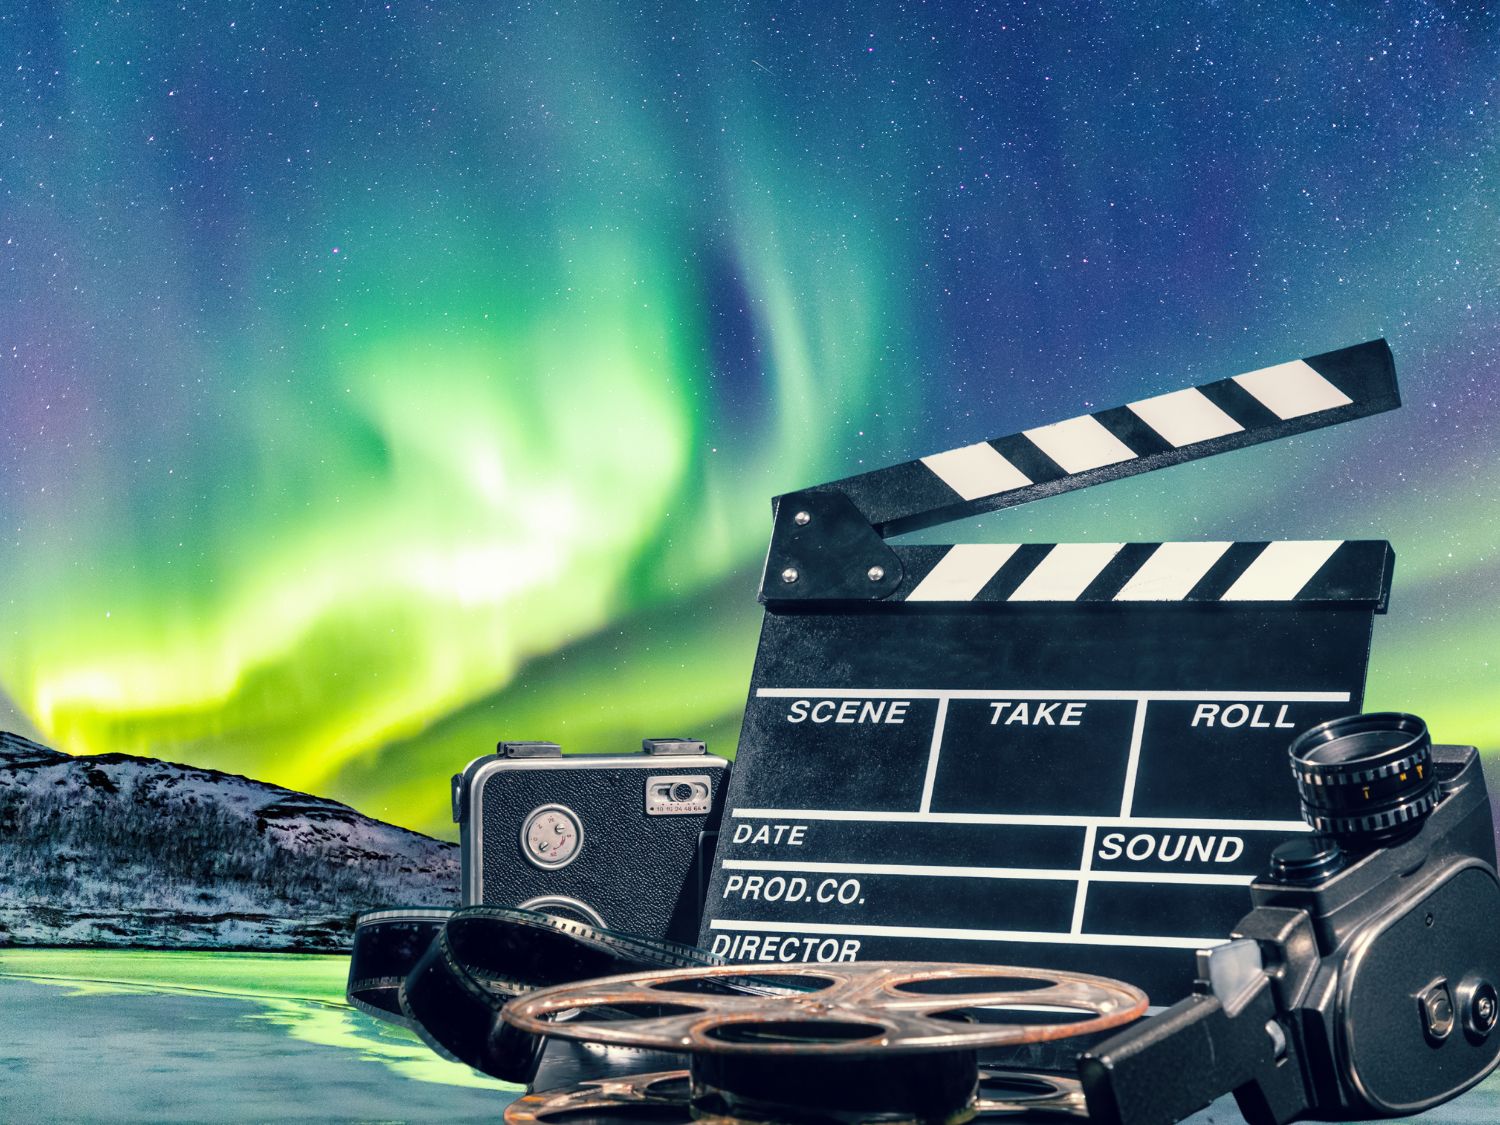 13 Extraordinary Movies Set In Finland That Will Inspire You To Visit!